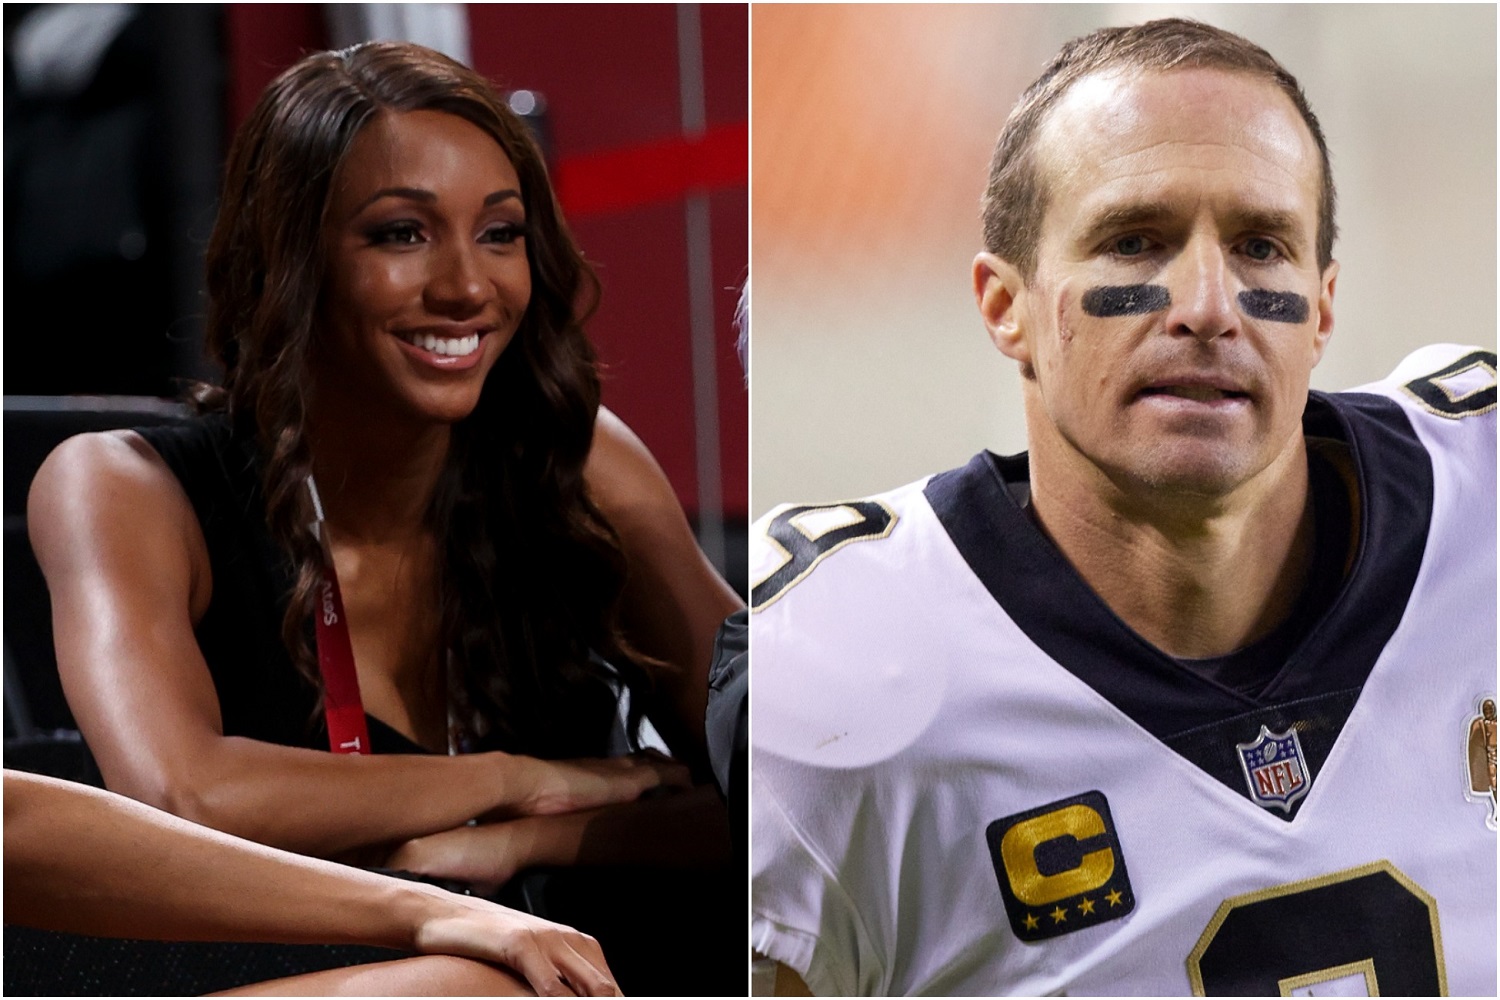 NBC Sports newcomers Maria Taylor and Drew Brees.